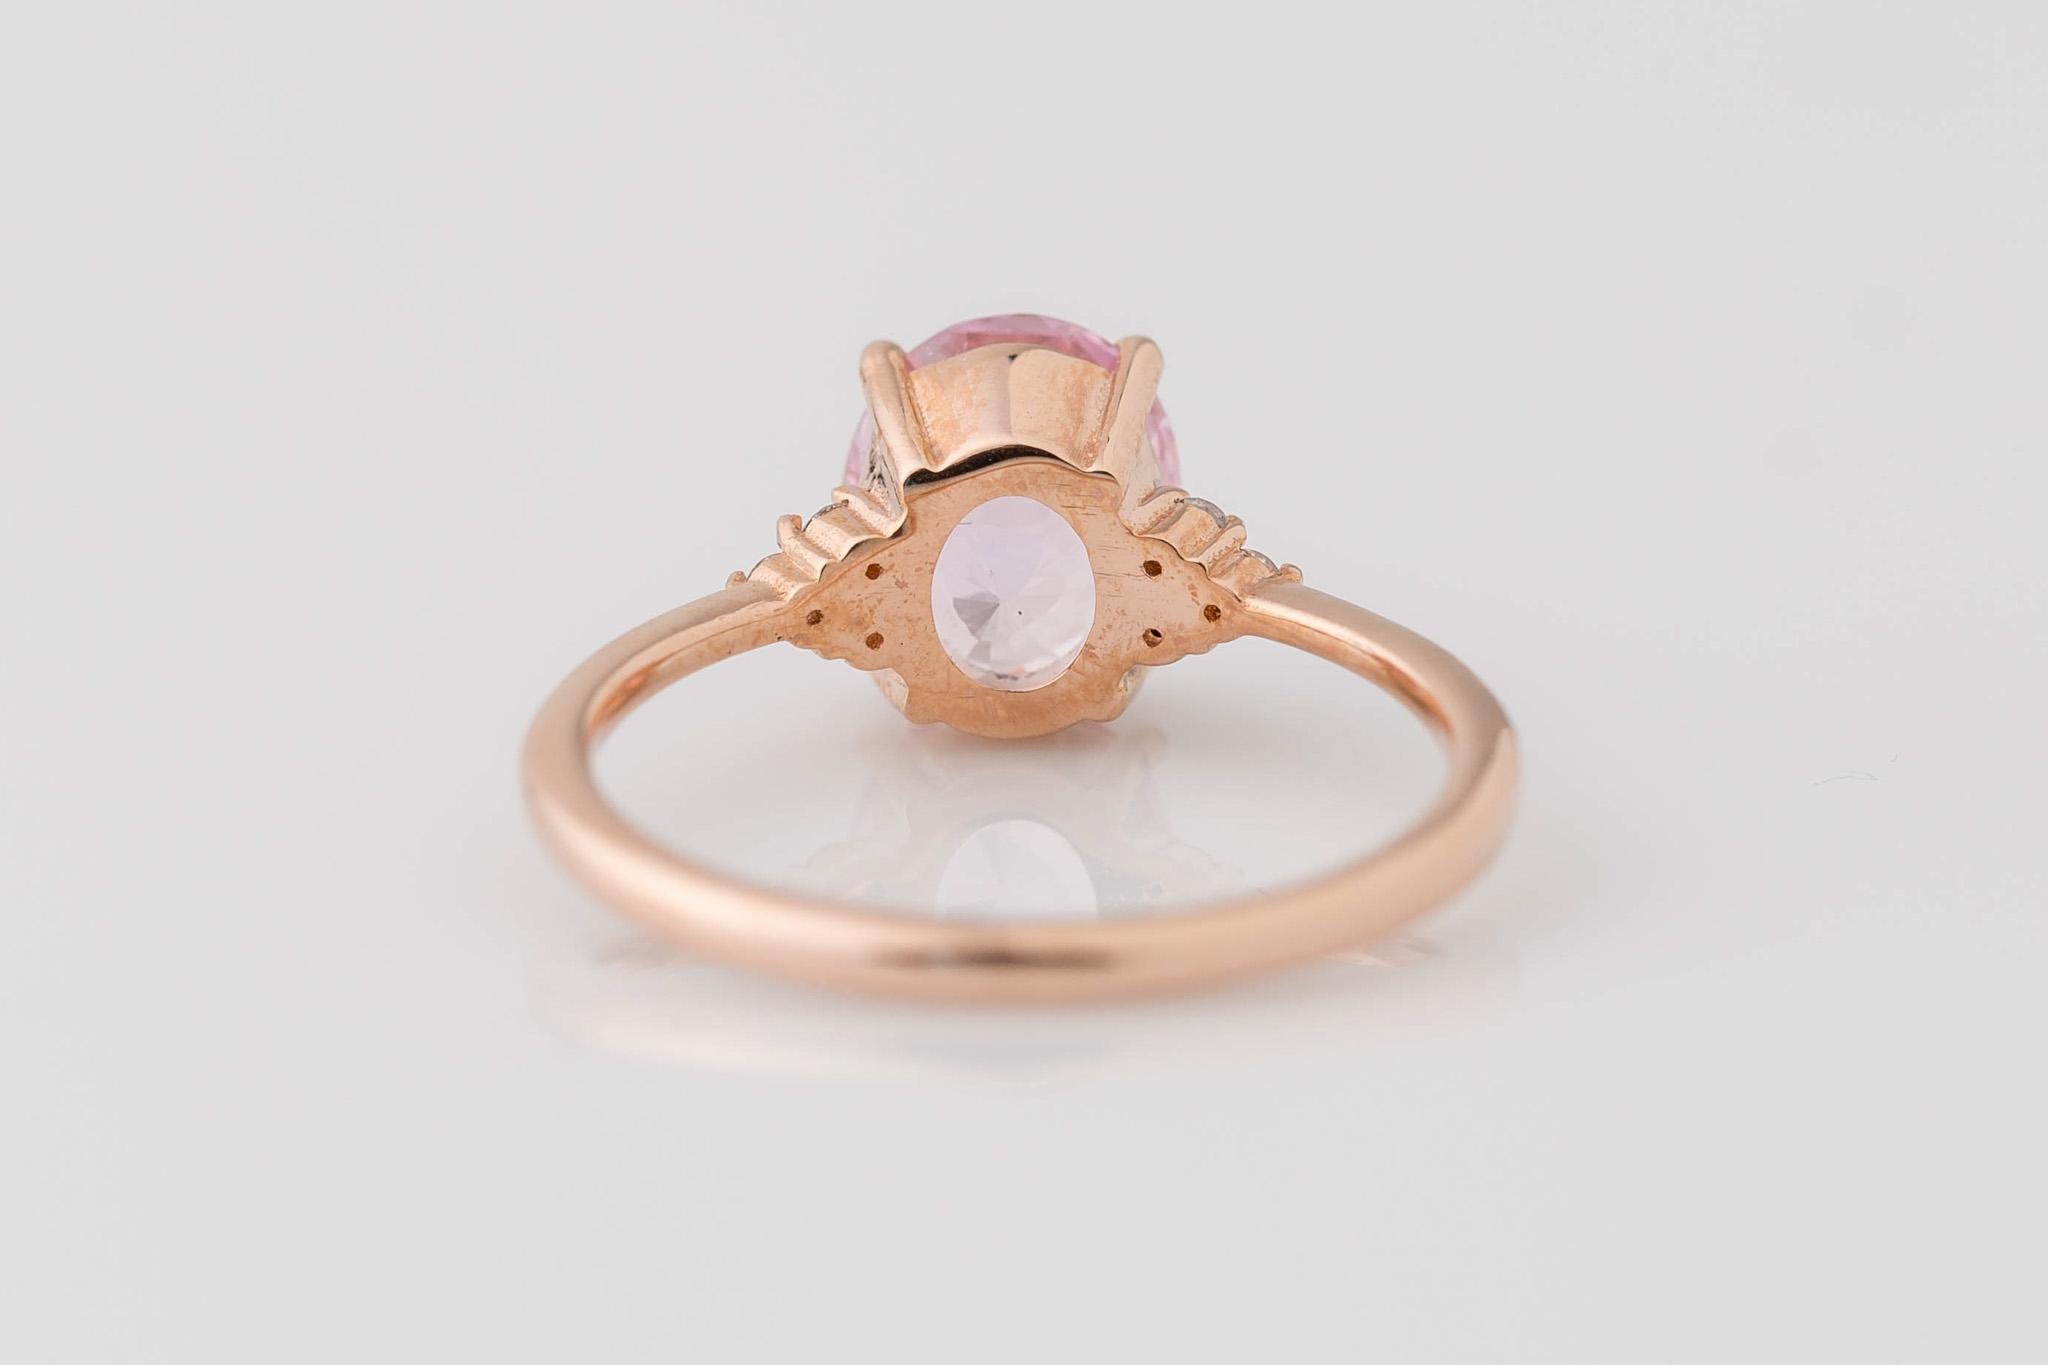 For Sale:  GIA Certified 2.31 Carat Oval Natural Pink Sapphire Diamond Ring 4